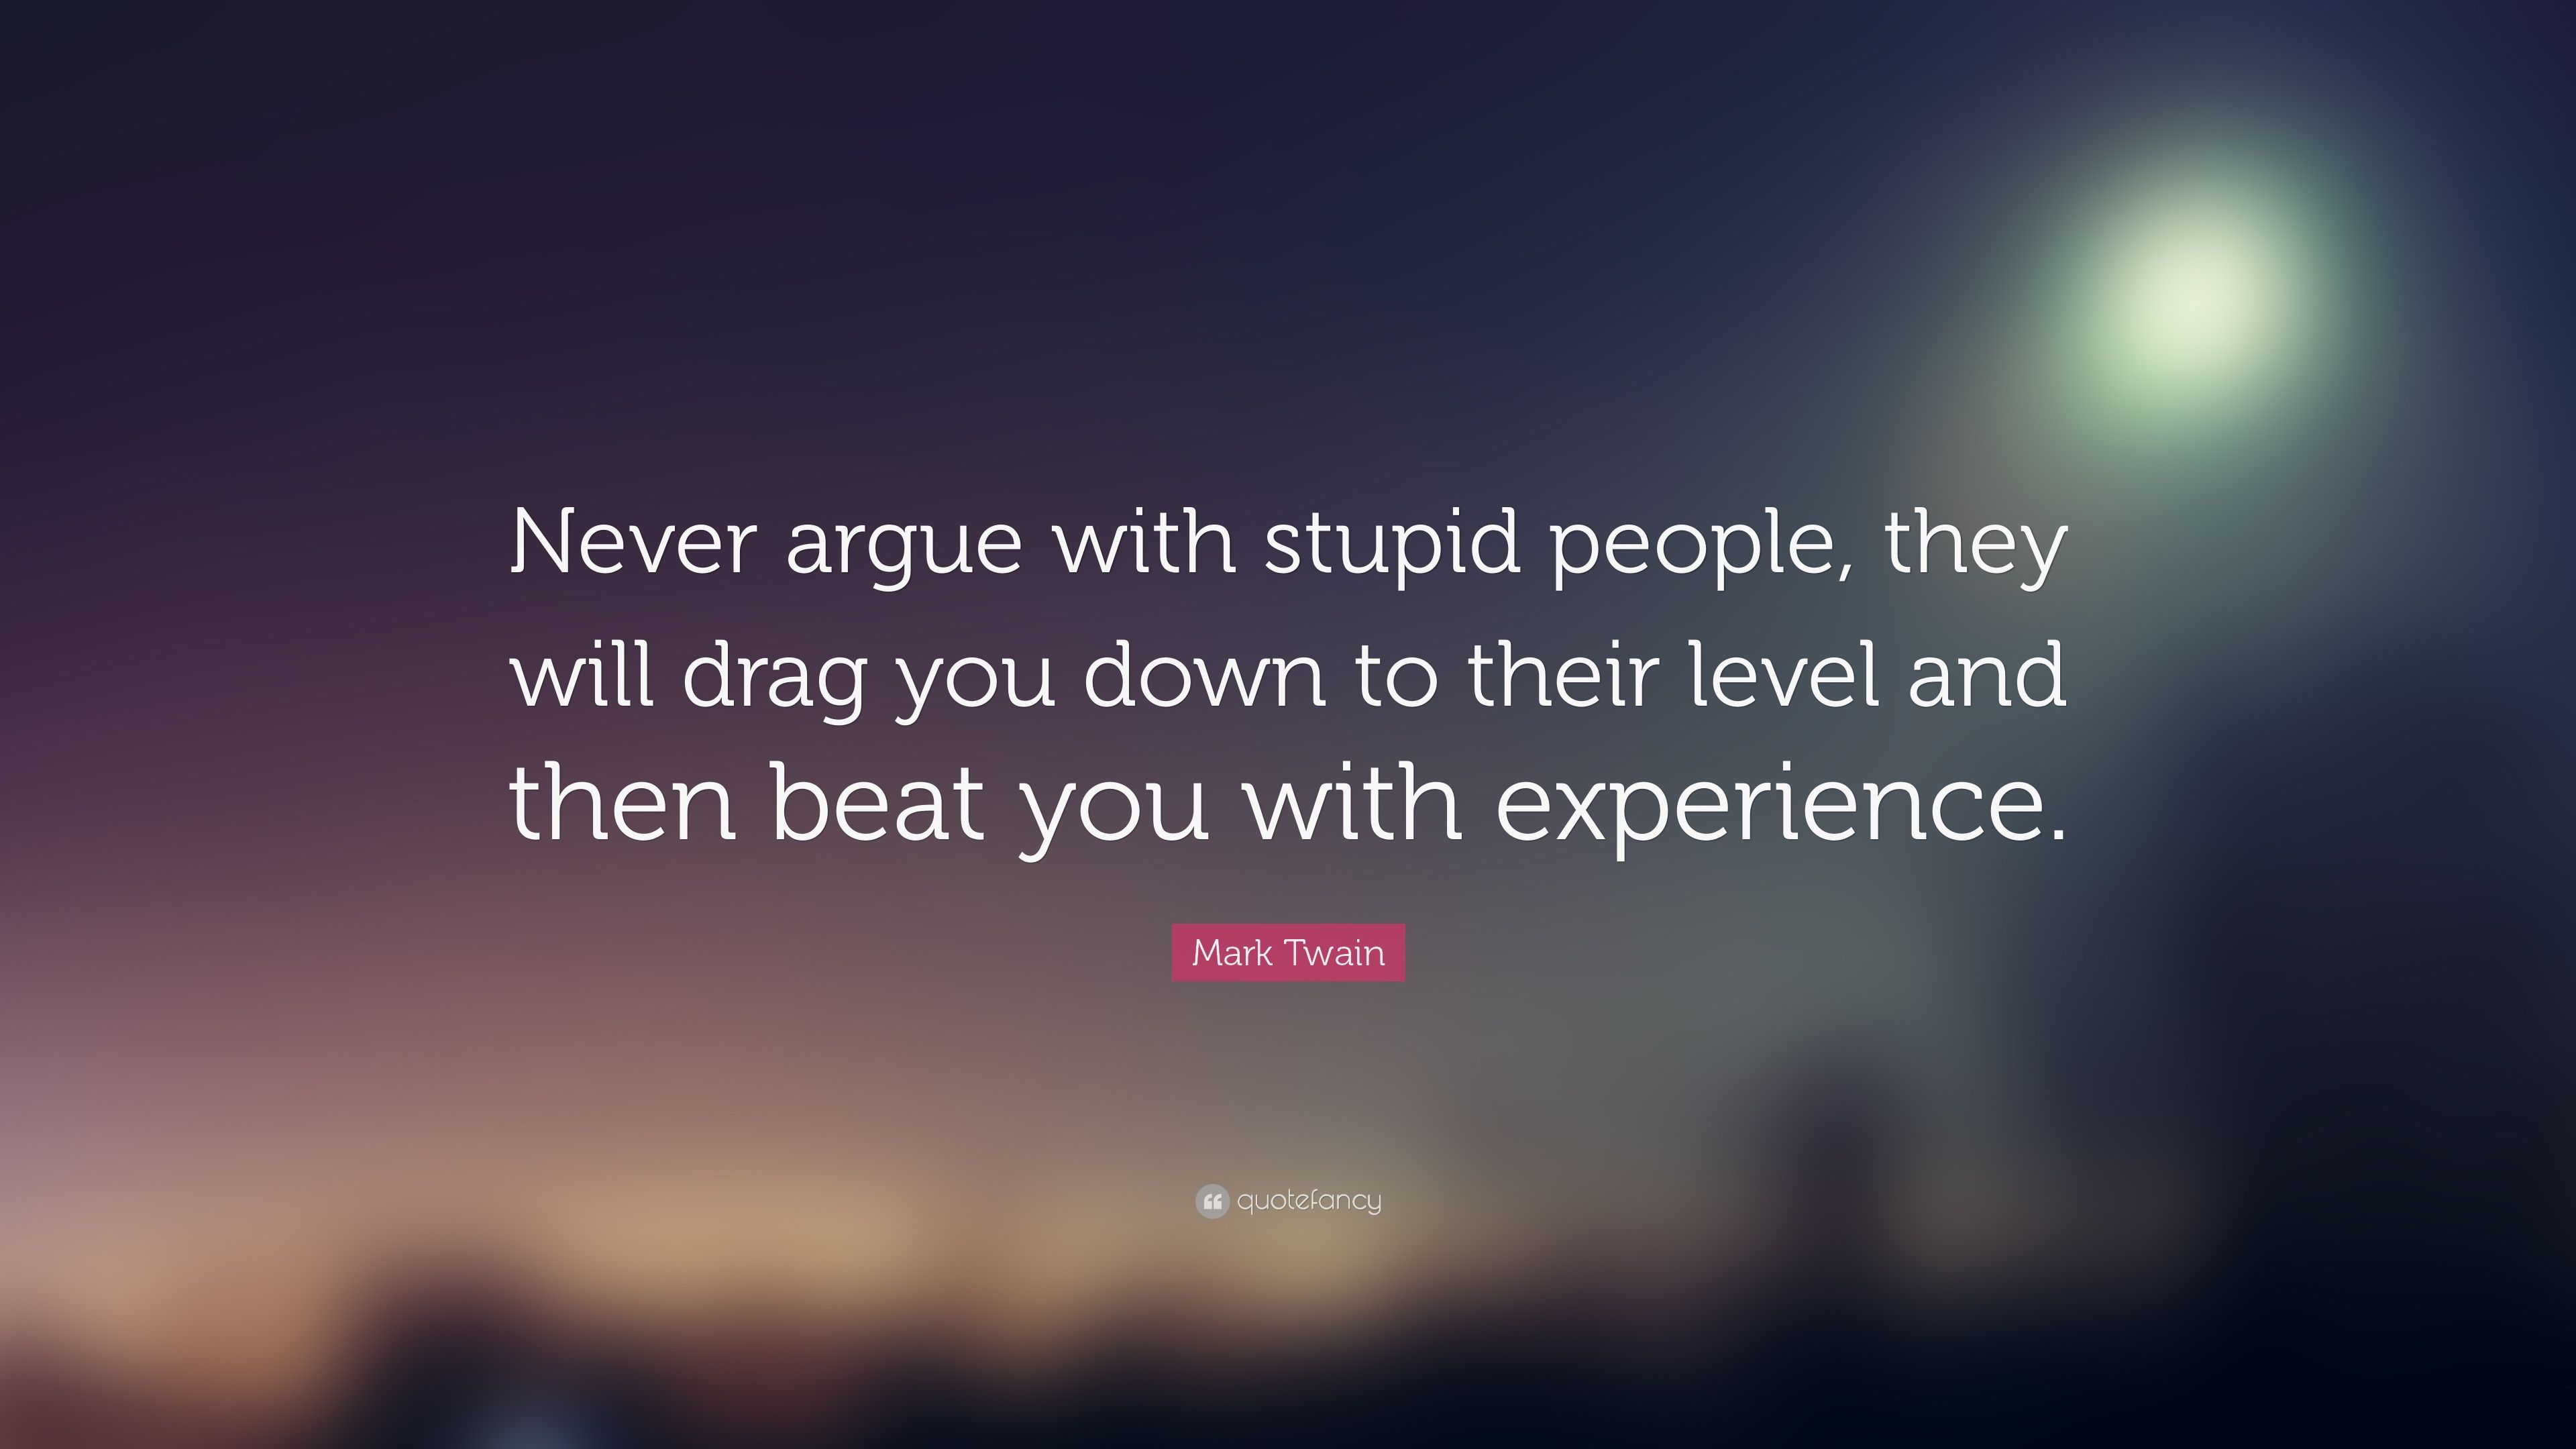 Mark Twain Quote: “Never argue with stupid people, they will drag